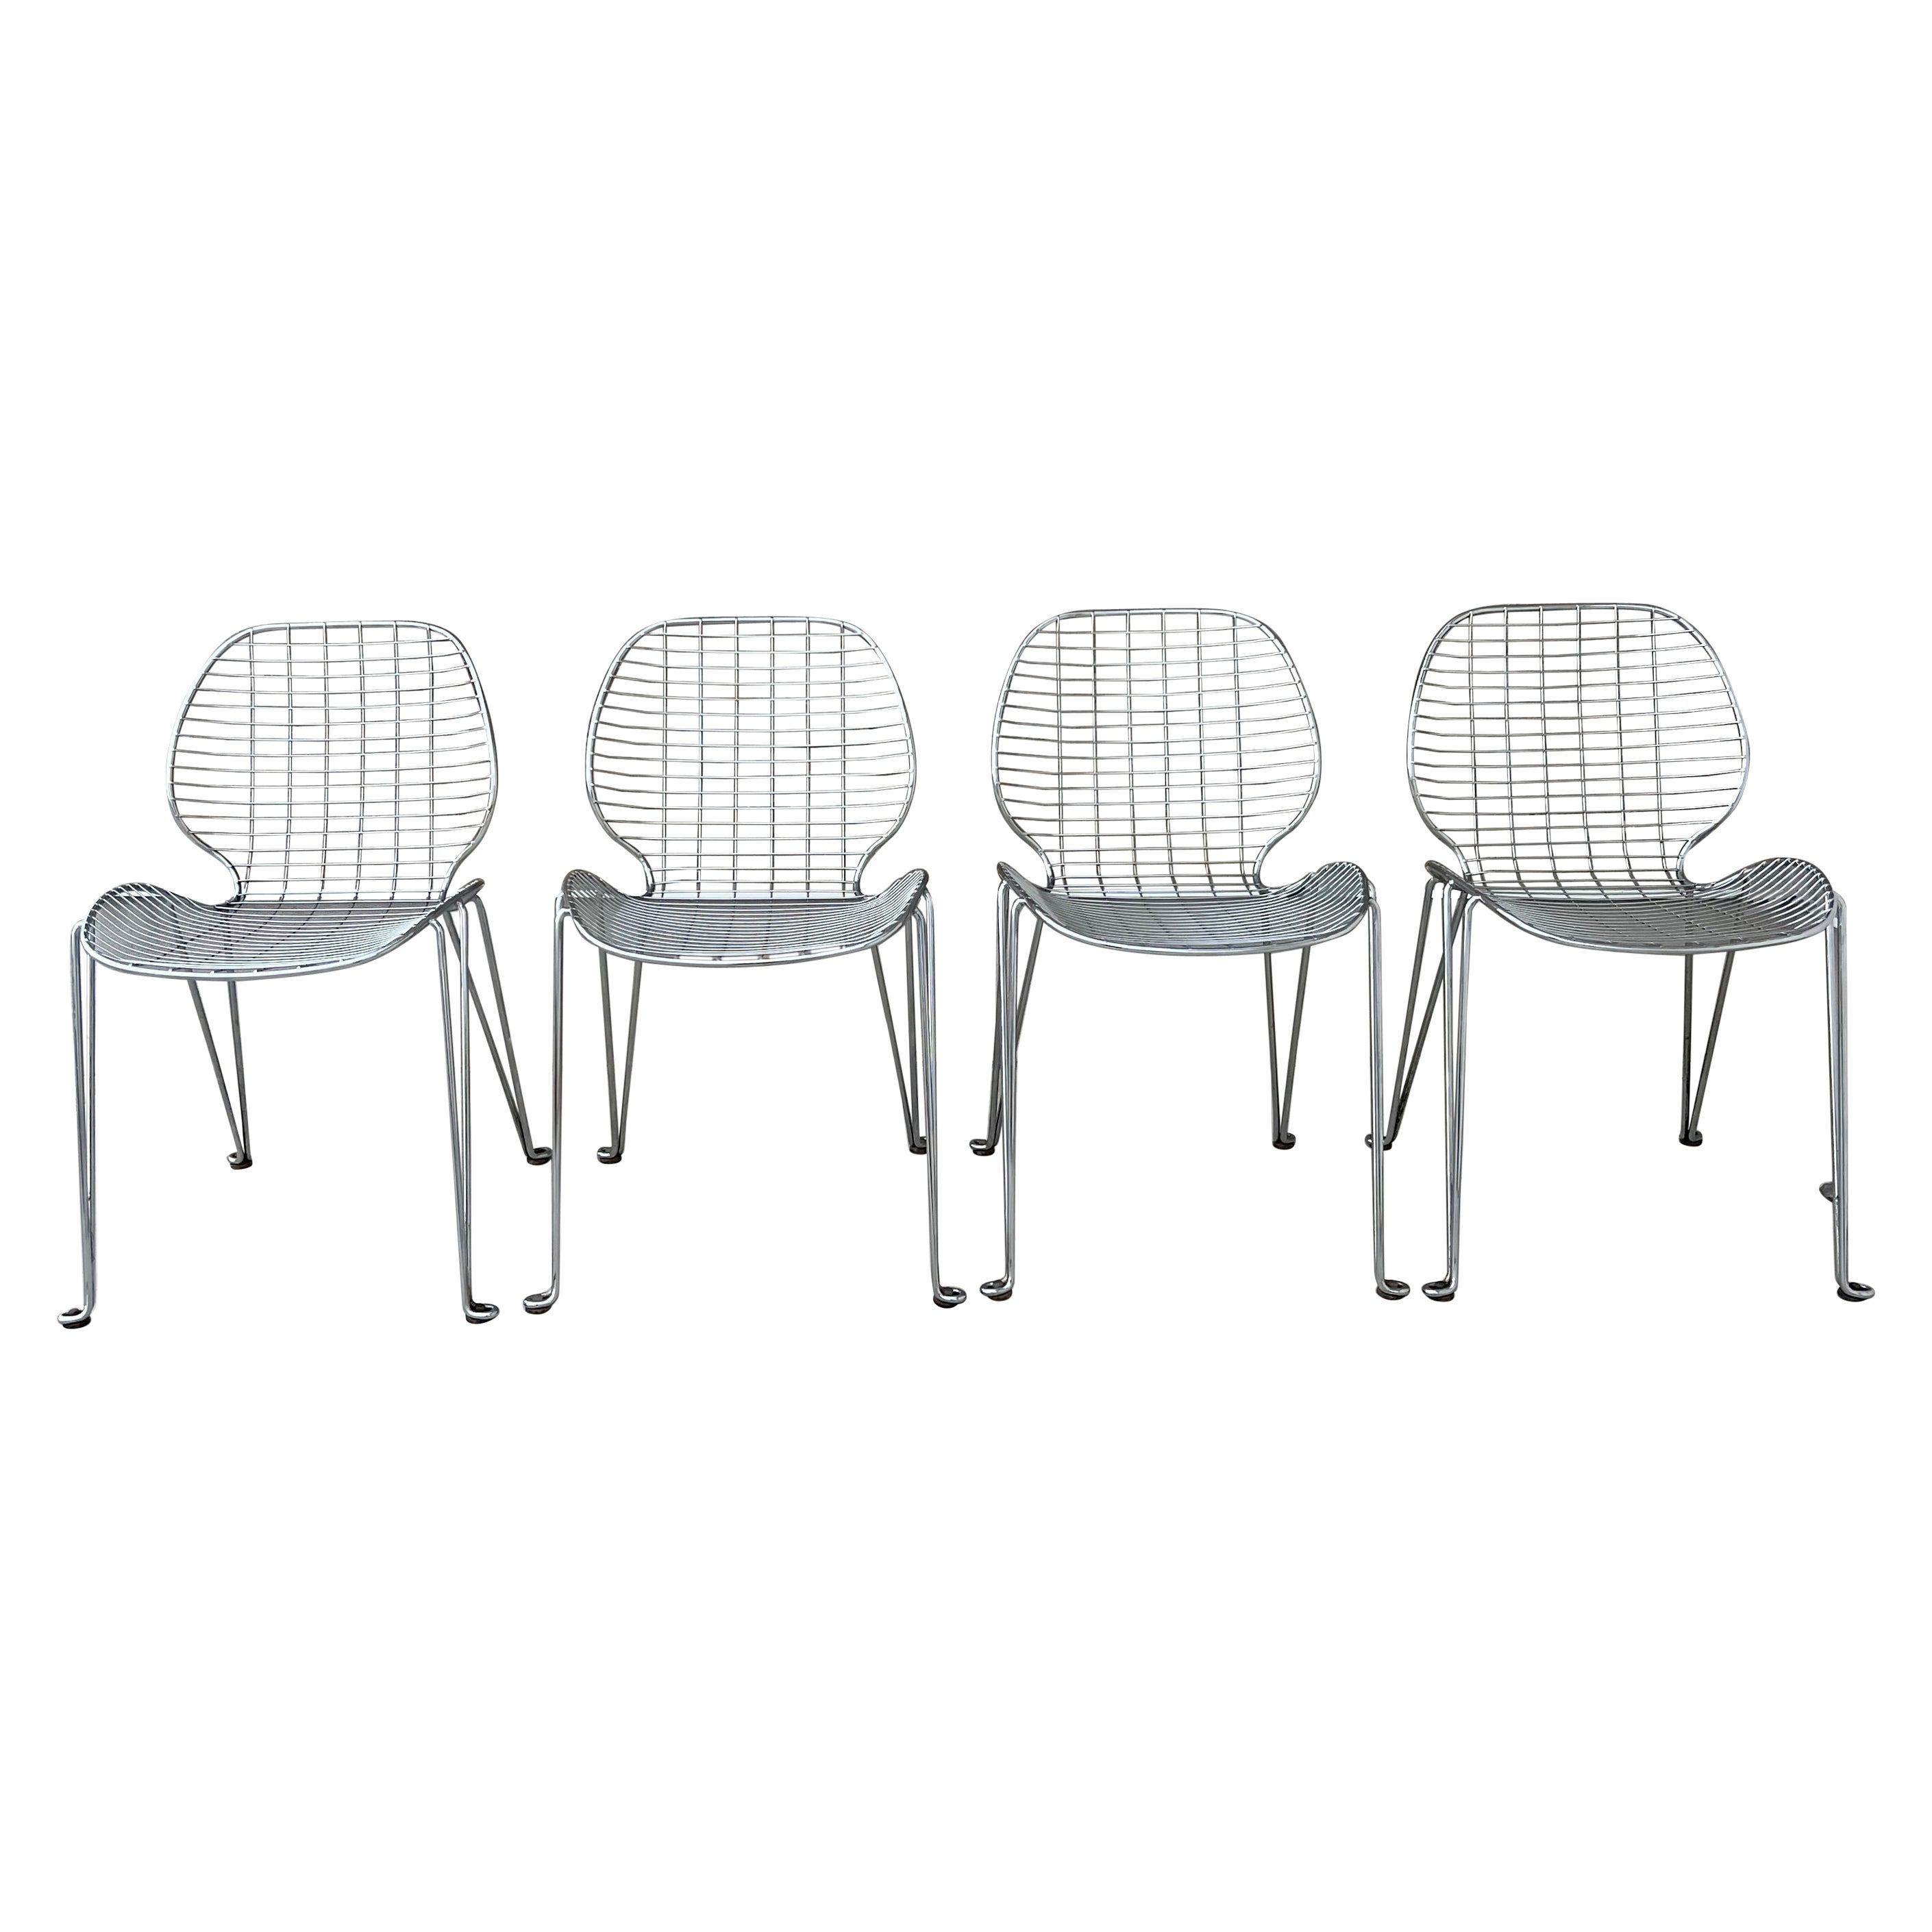 Vintage Metal Wire Chairs With Hairpin Legs - Set of Four